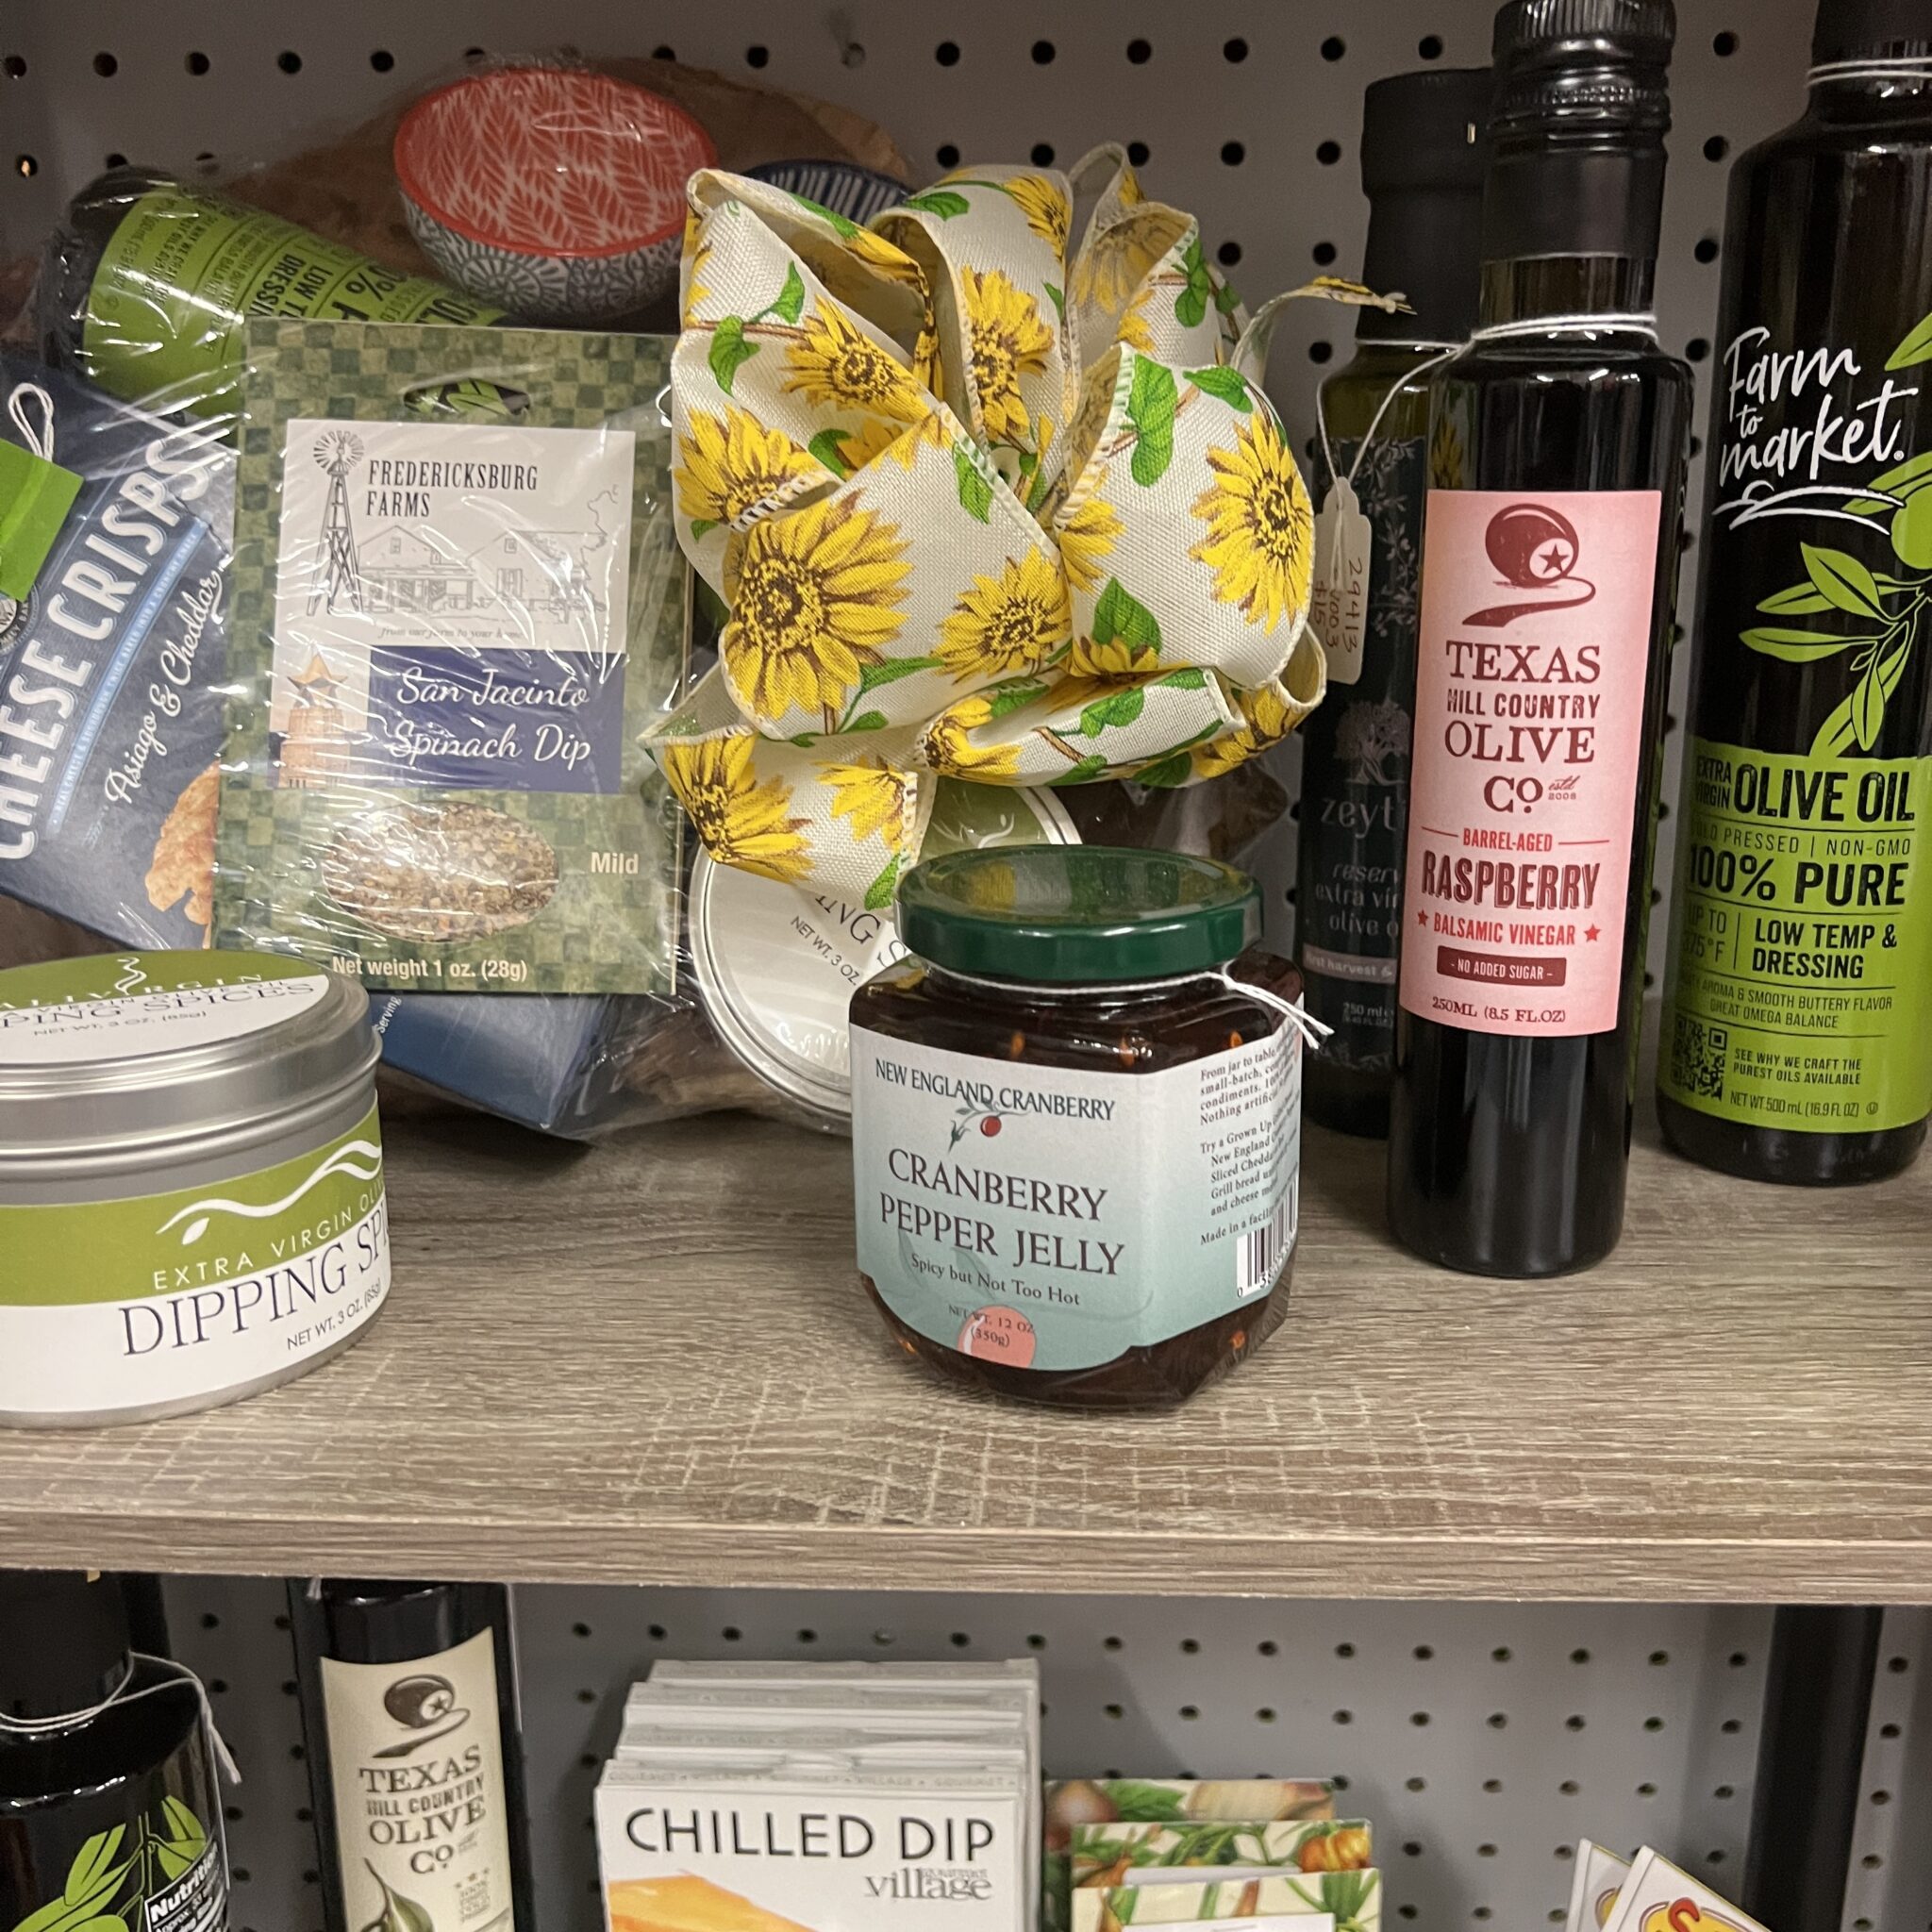 regional olive oils, jellies, dipping sauces, cutting boards, trivets, Texas, mugs, hats